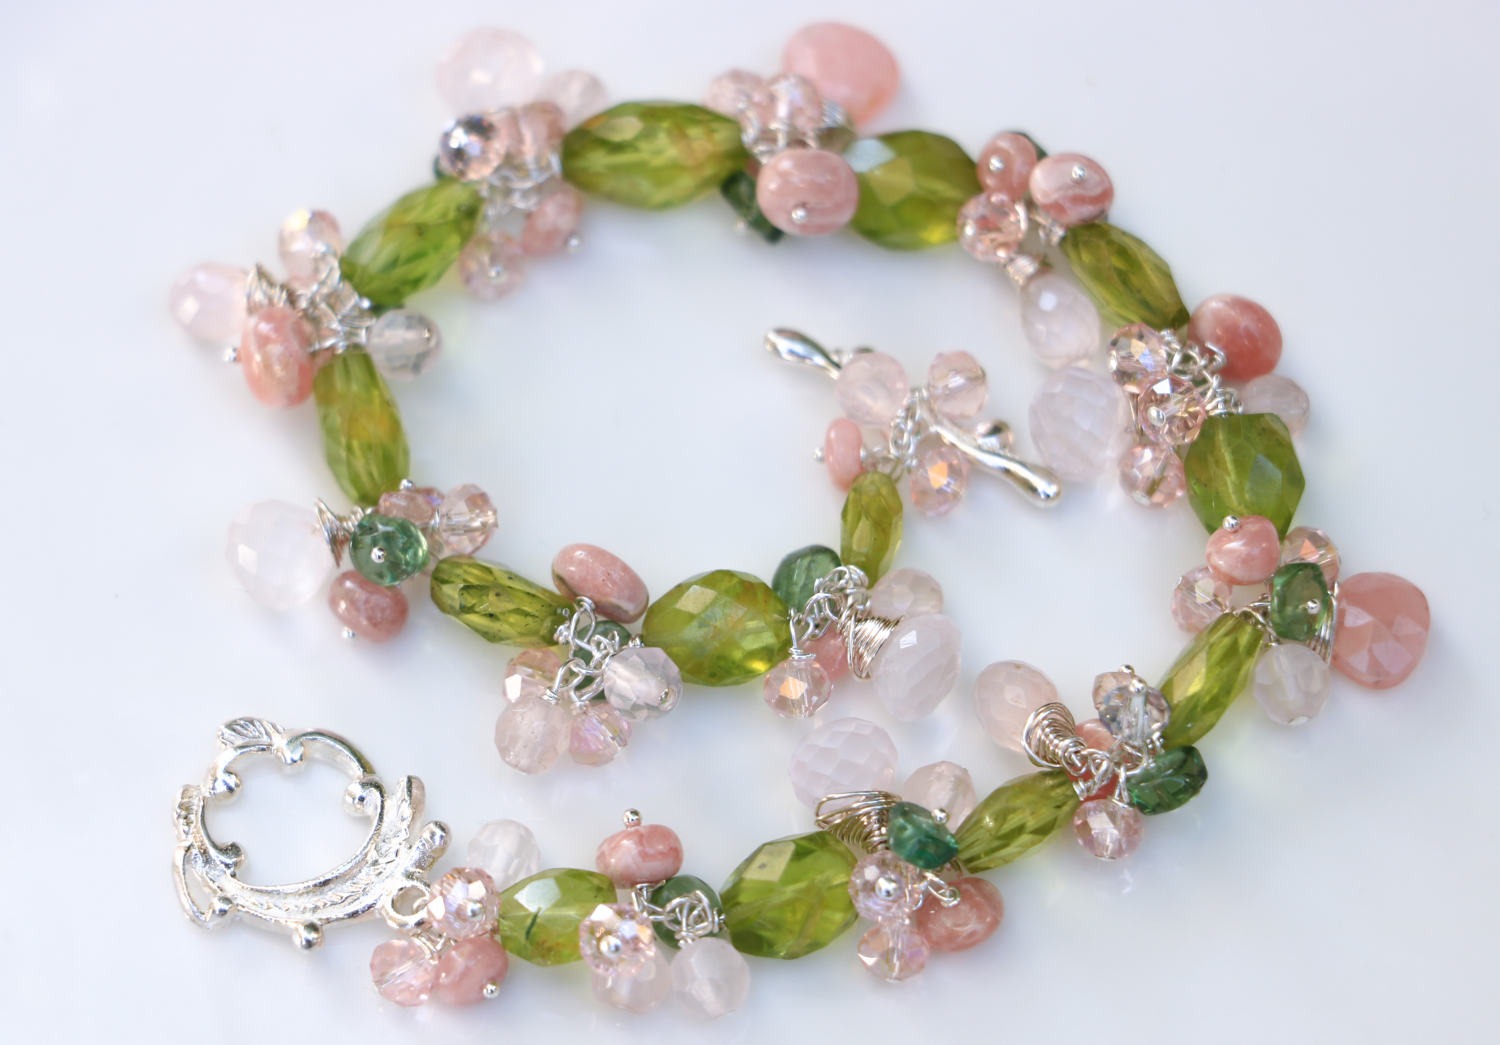 Green Peridot with Rose Quartz and Pink Opal Gemstone Cluster Bracelet in Silver